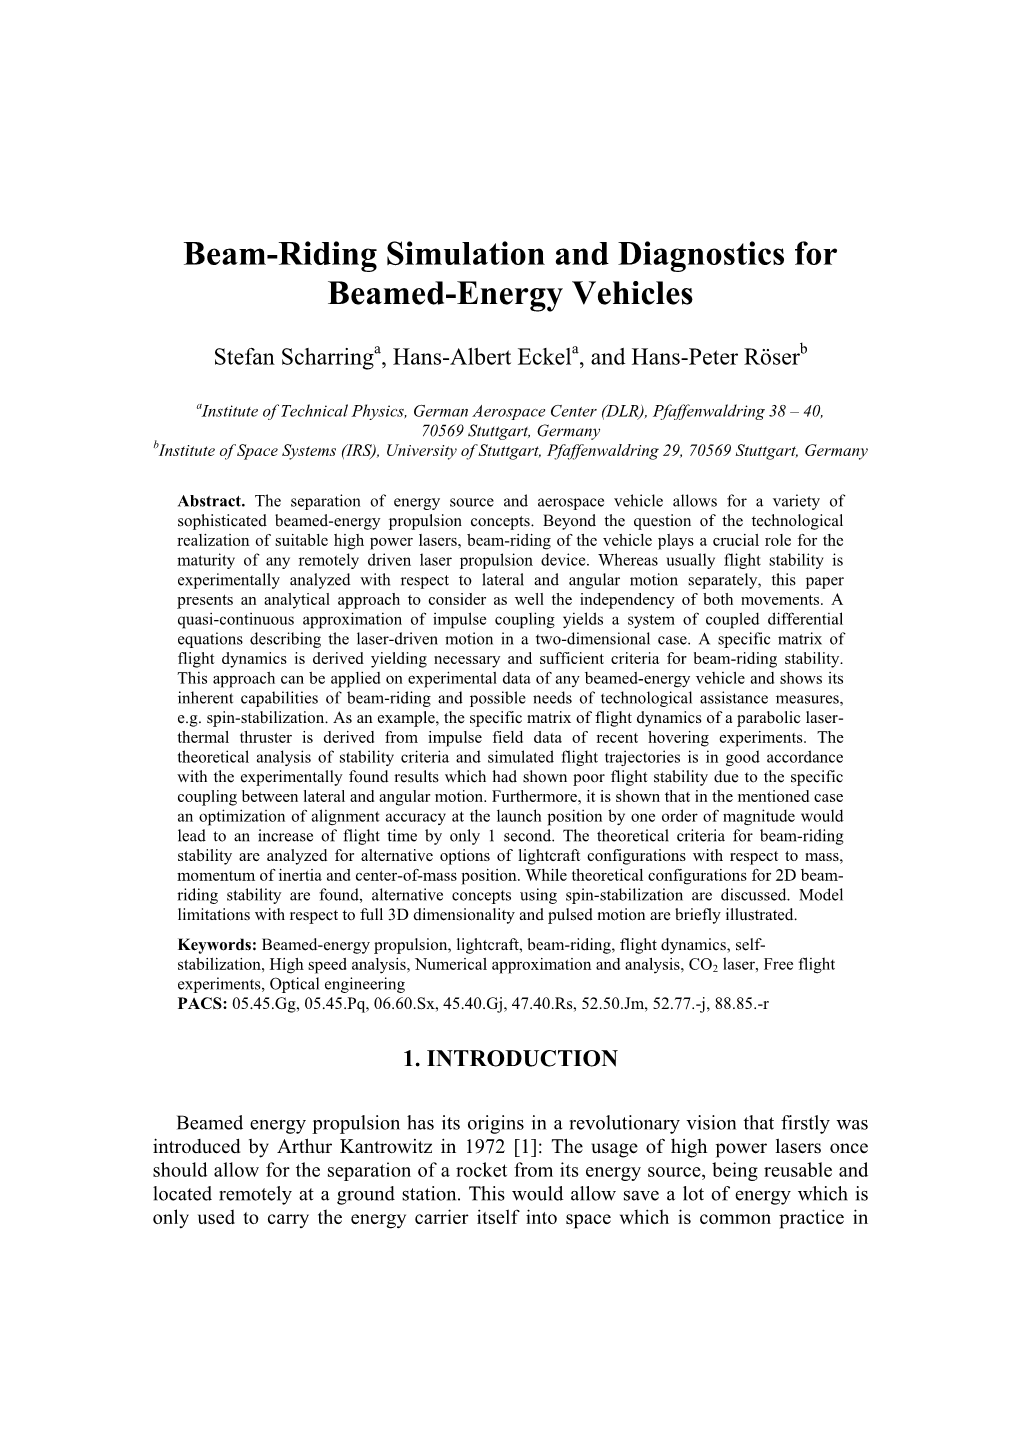 Beam-Riding Simulation and Diagnostics for Beamed-Energy Vehicles